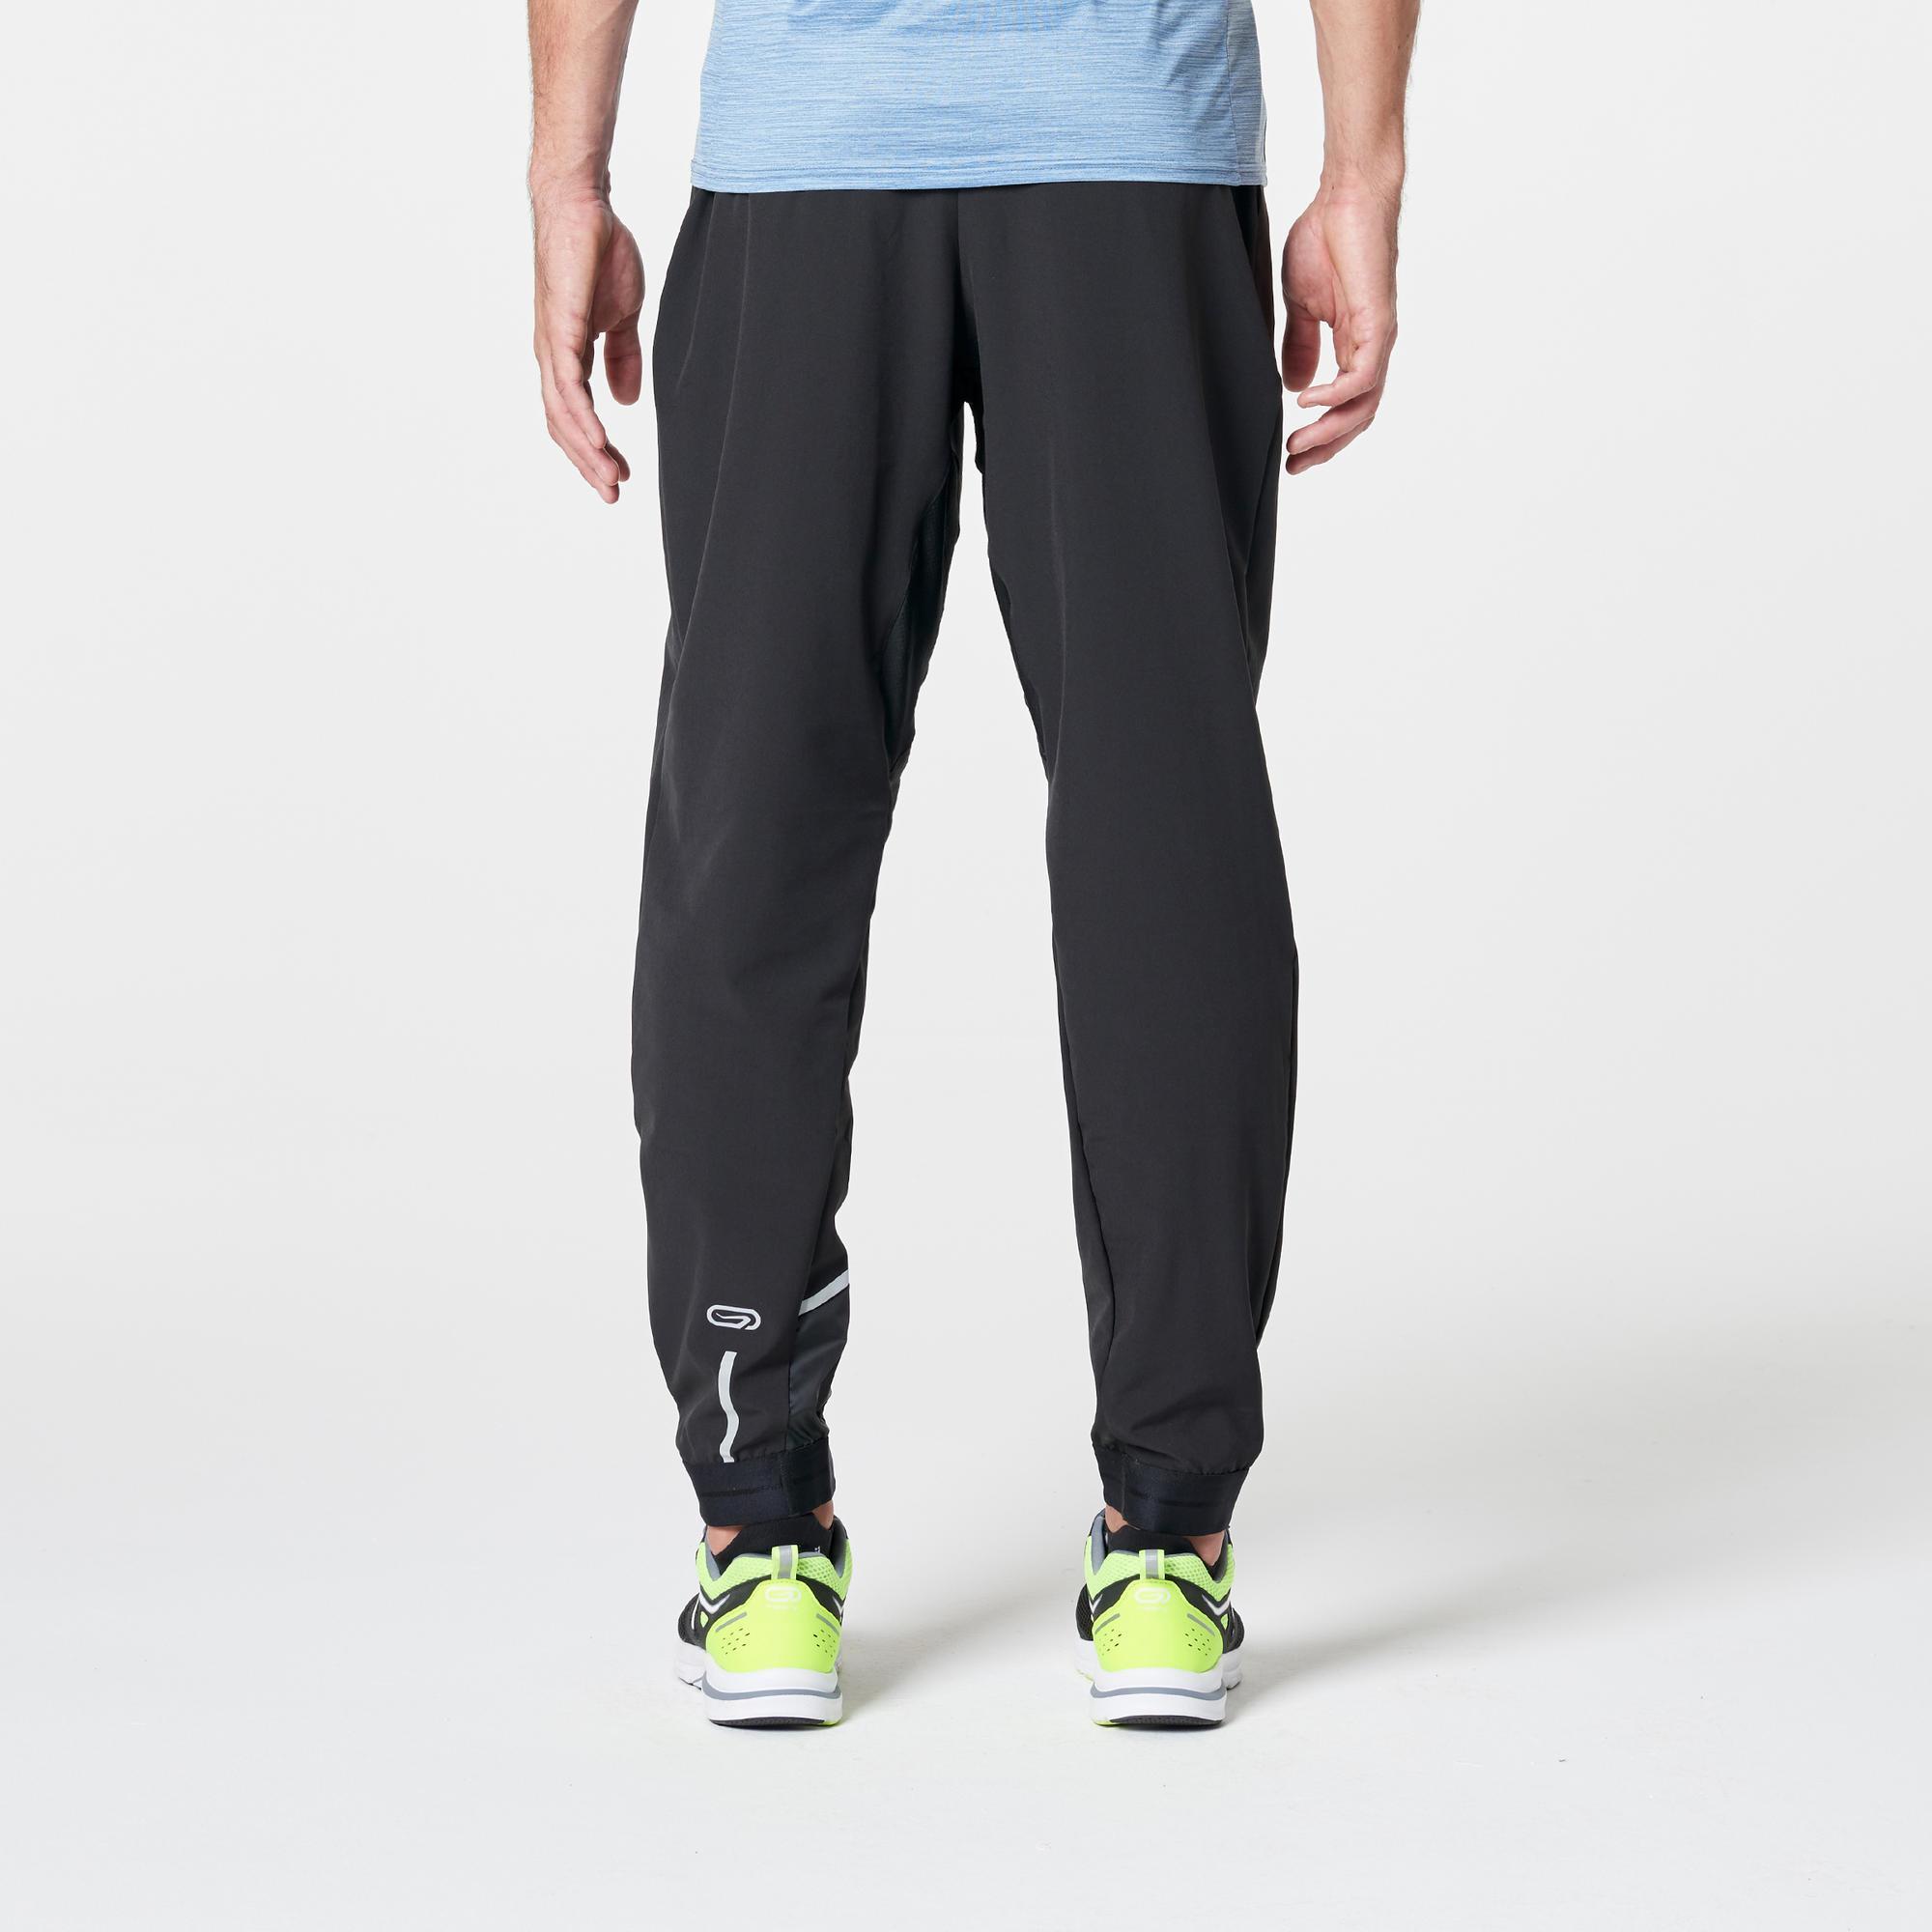 mens running trousers